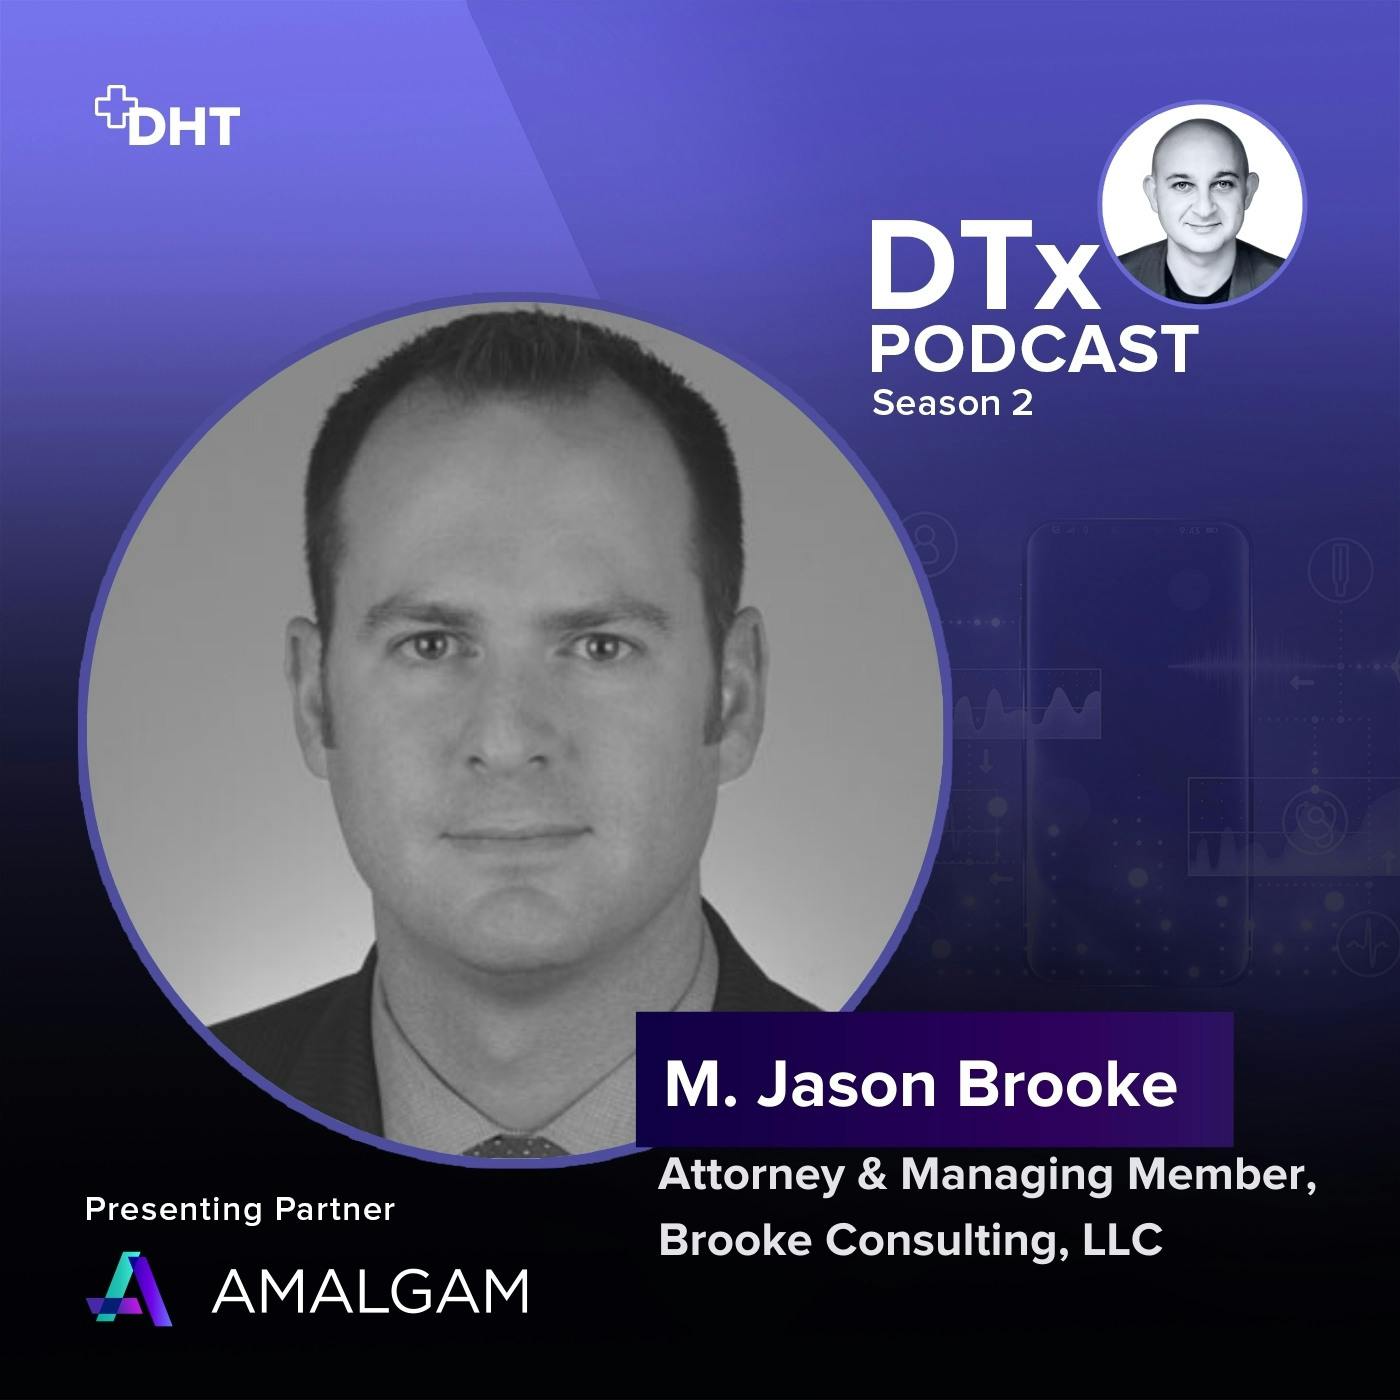 Ep28: The Evolving Regulatory Path for DTx: Jason Brooke Shares Insights on 510(k), De Novo, PMA and International Classification Processes for DTx